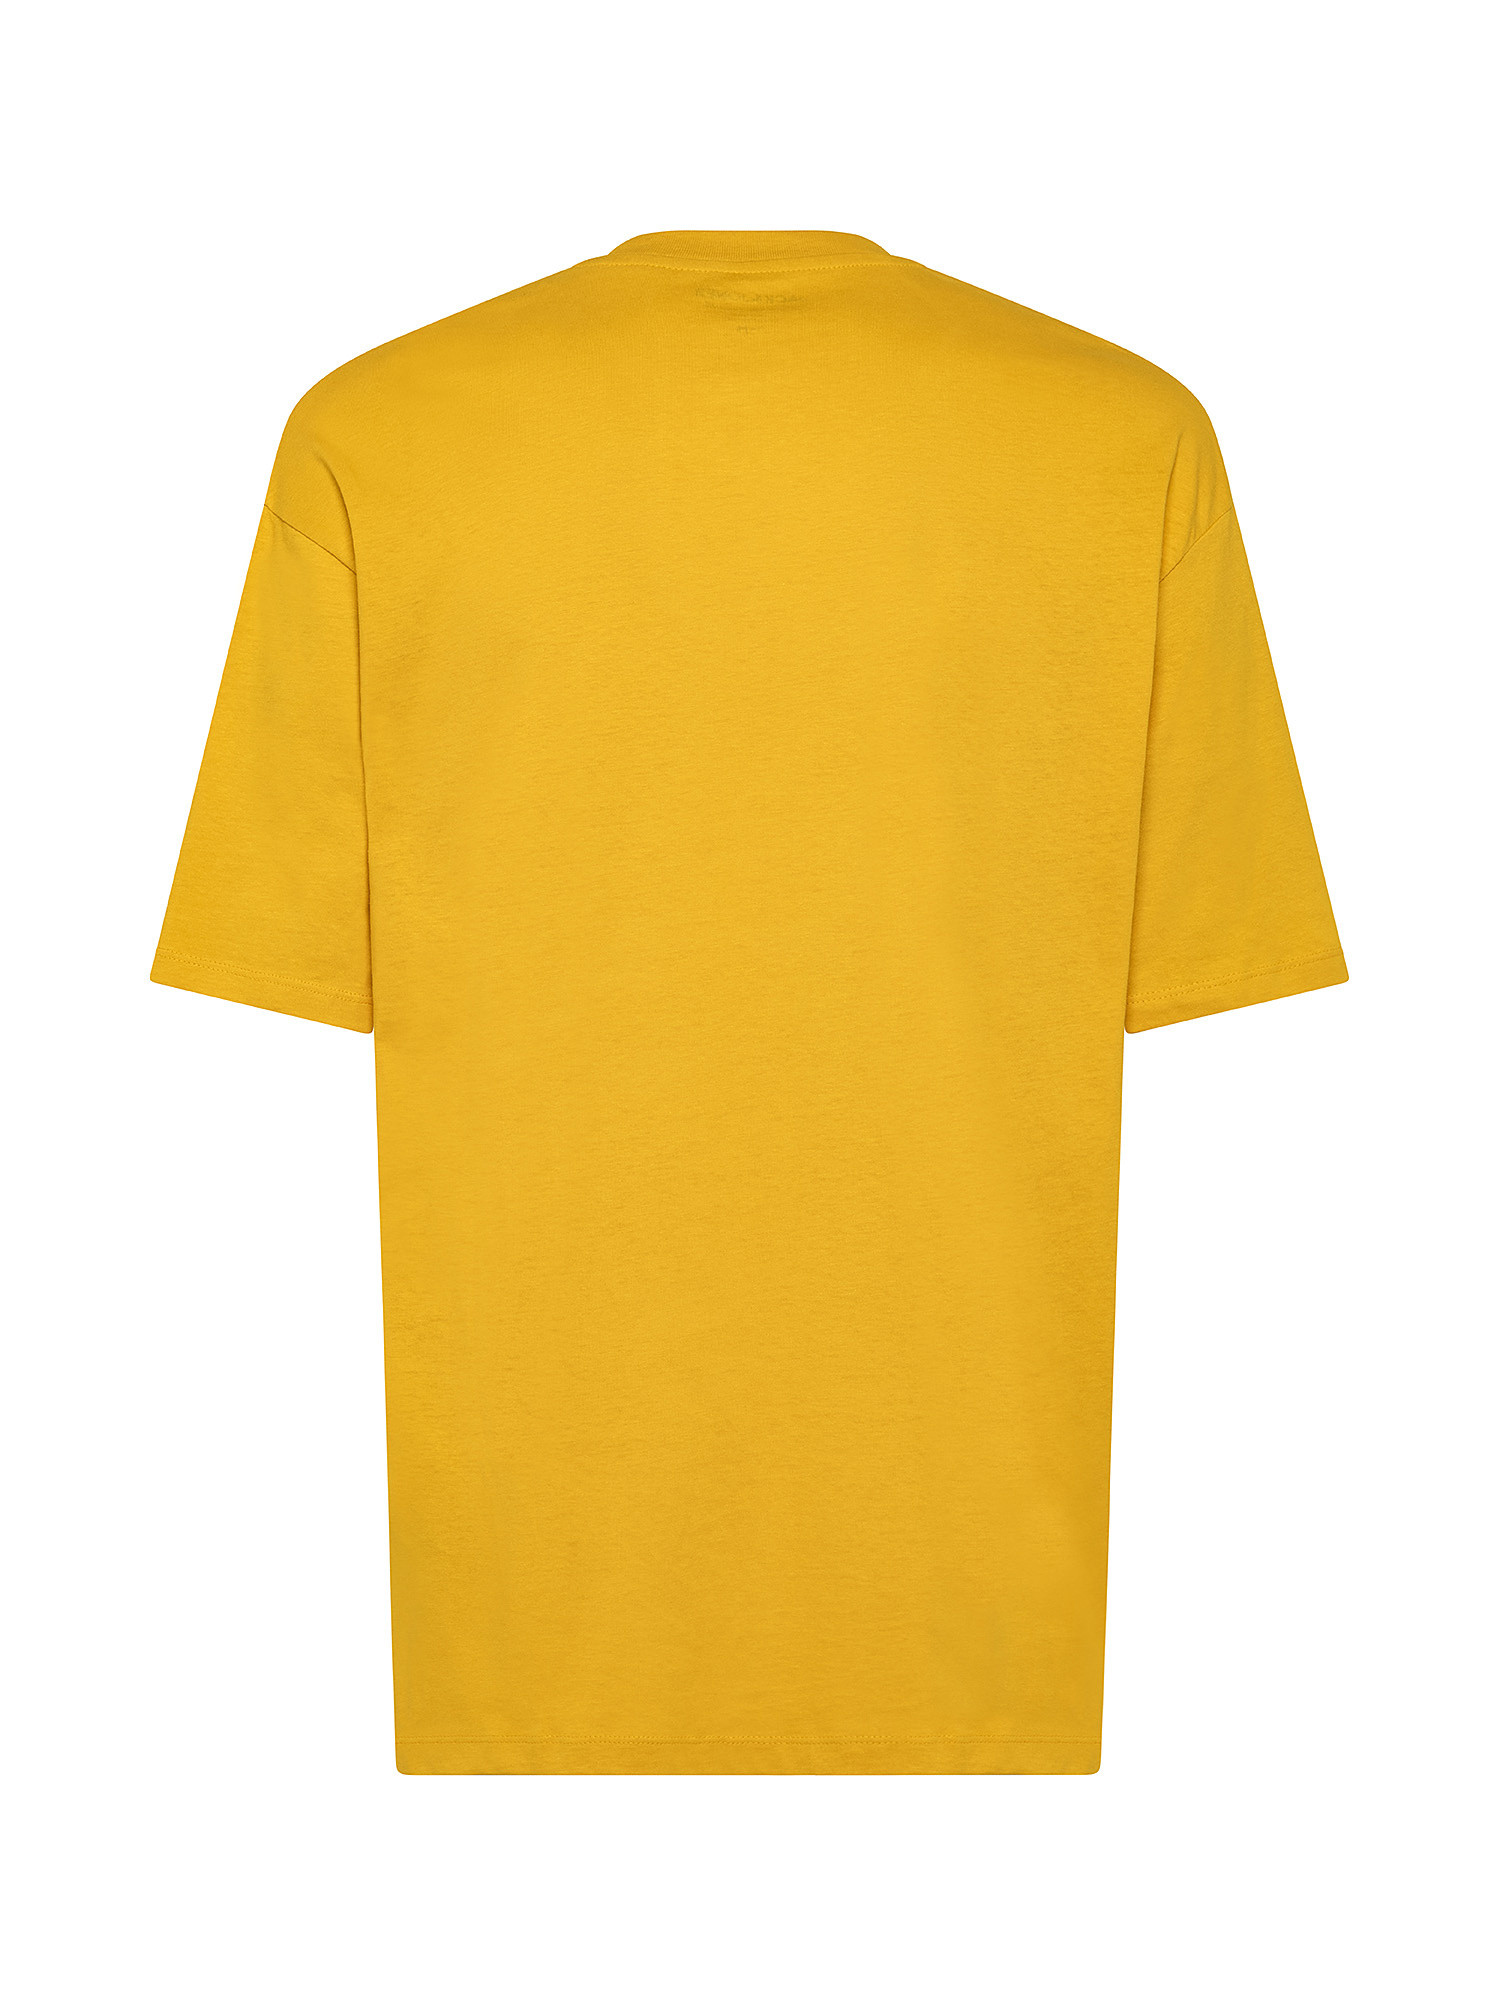 T-shirt 100% cotone, Giallo, large image number 1